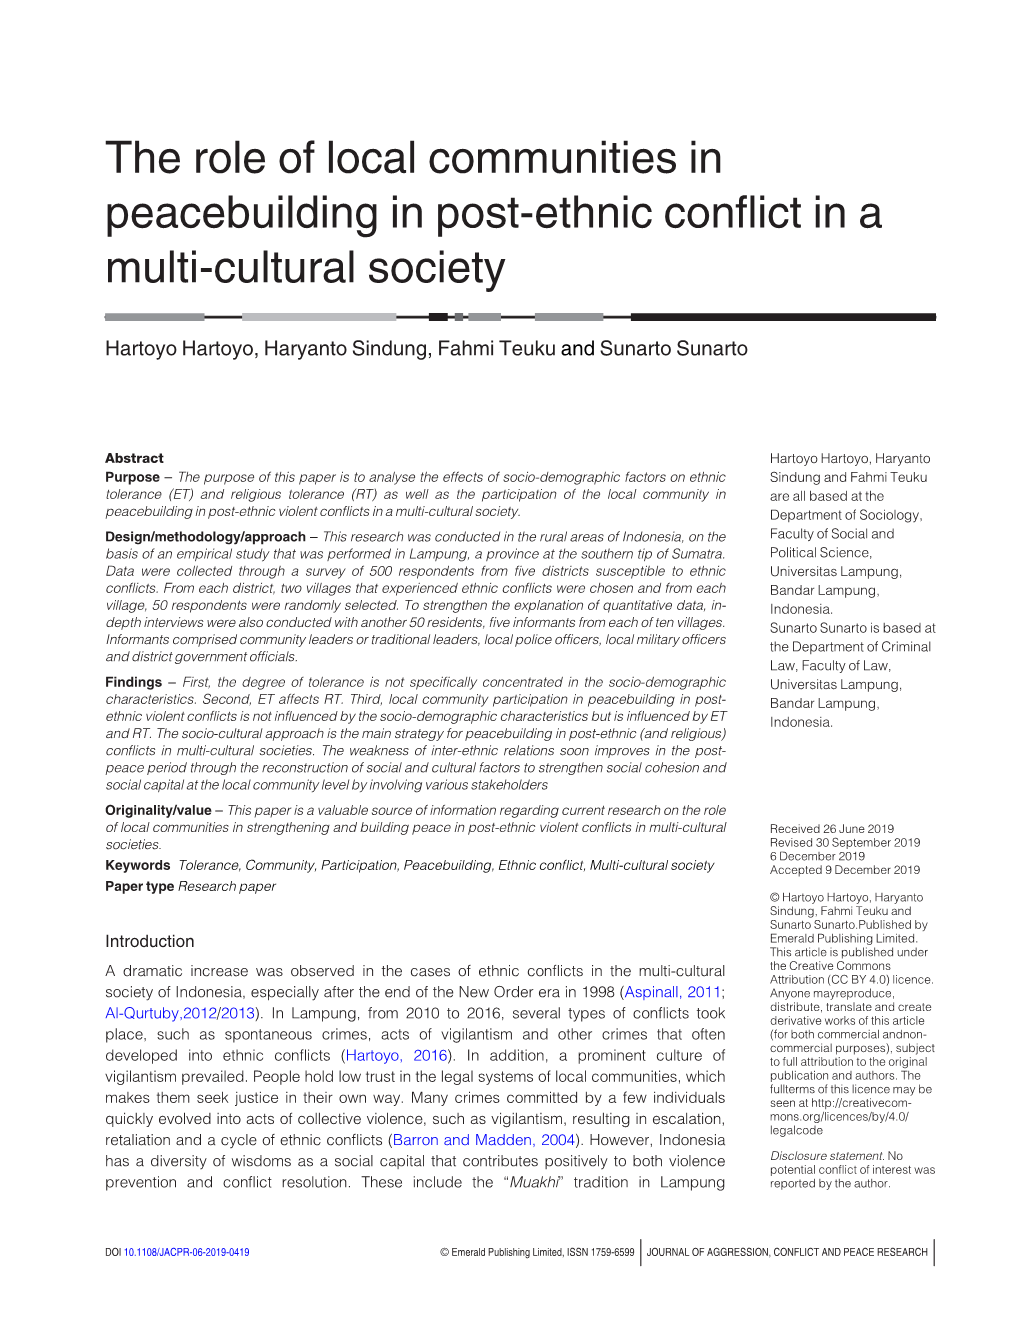 The Role of Local Communities in Peacebuilding in Post-Ethnic Conflict